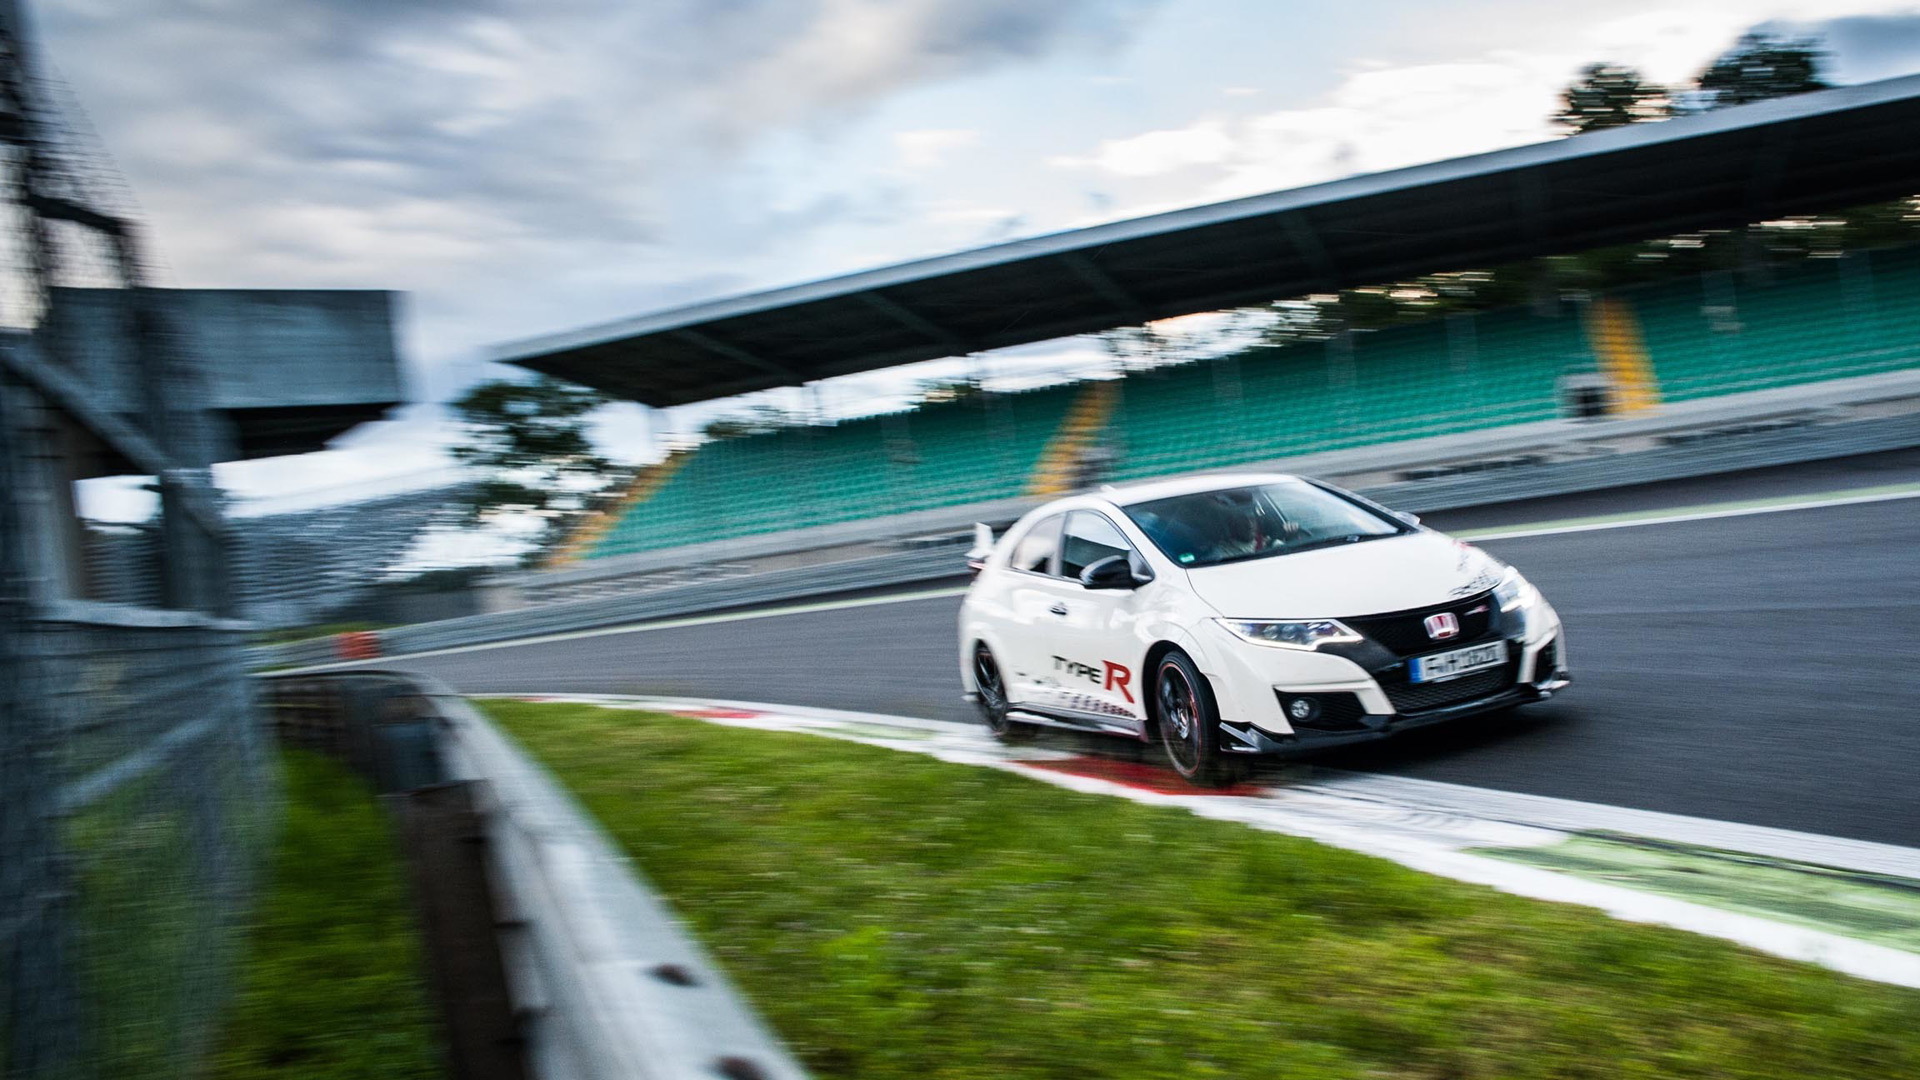 2015 Honda Civic Type R sets front-wheel-drive benchmark for five iconic racetracks